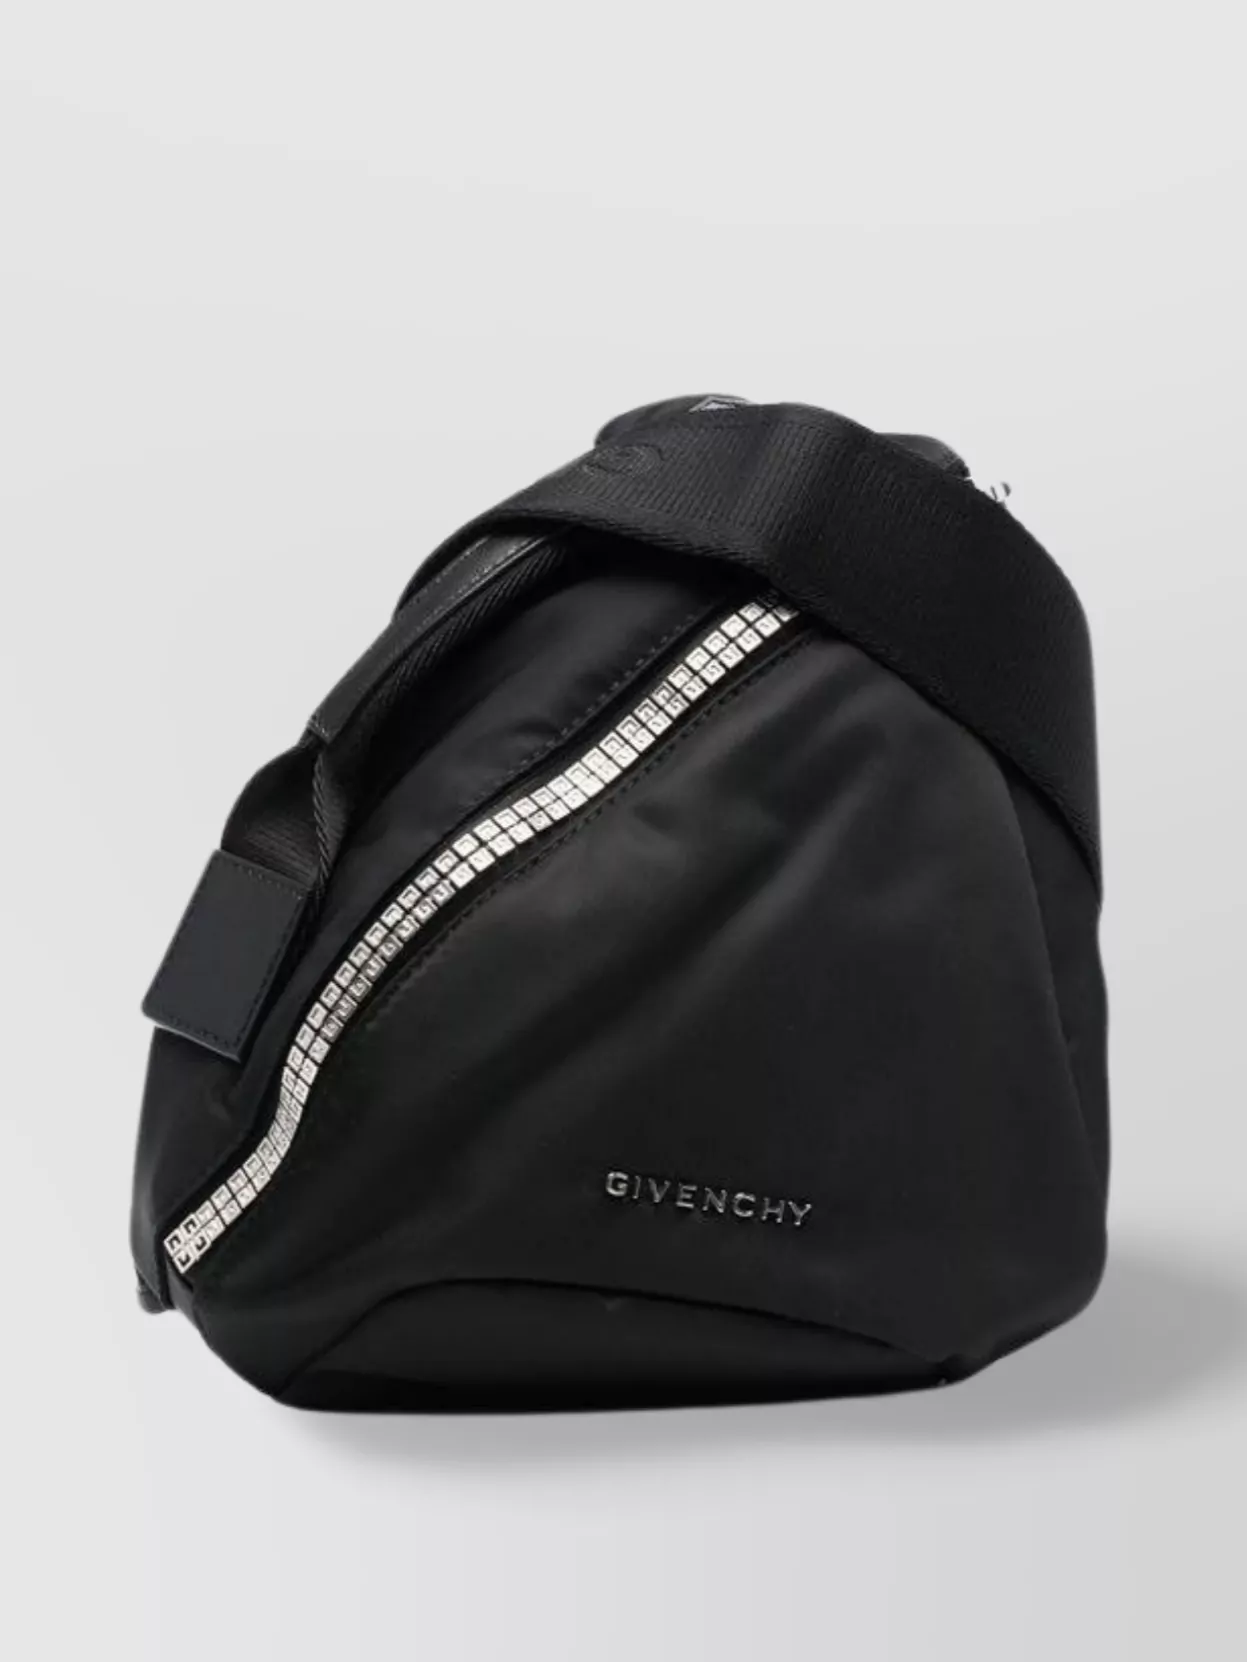 Givenchy G-zip Triangle Bag Small In Black